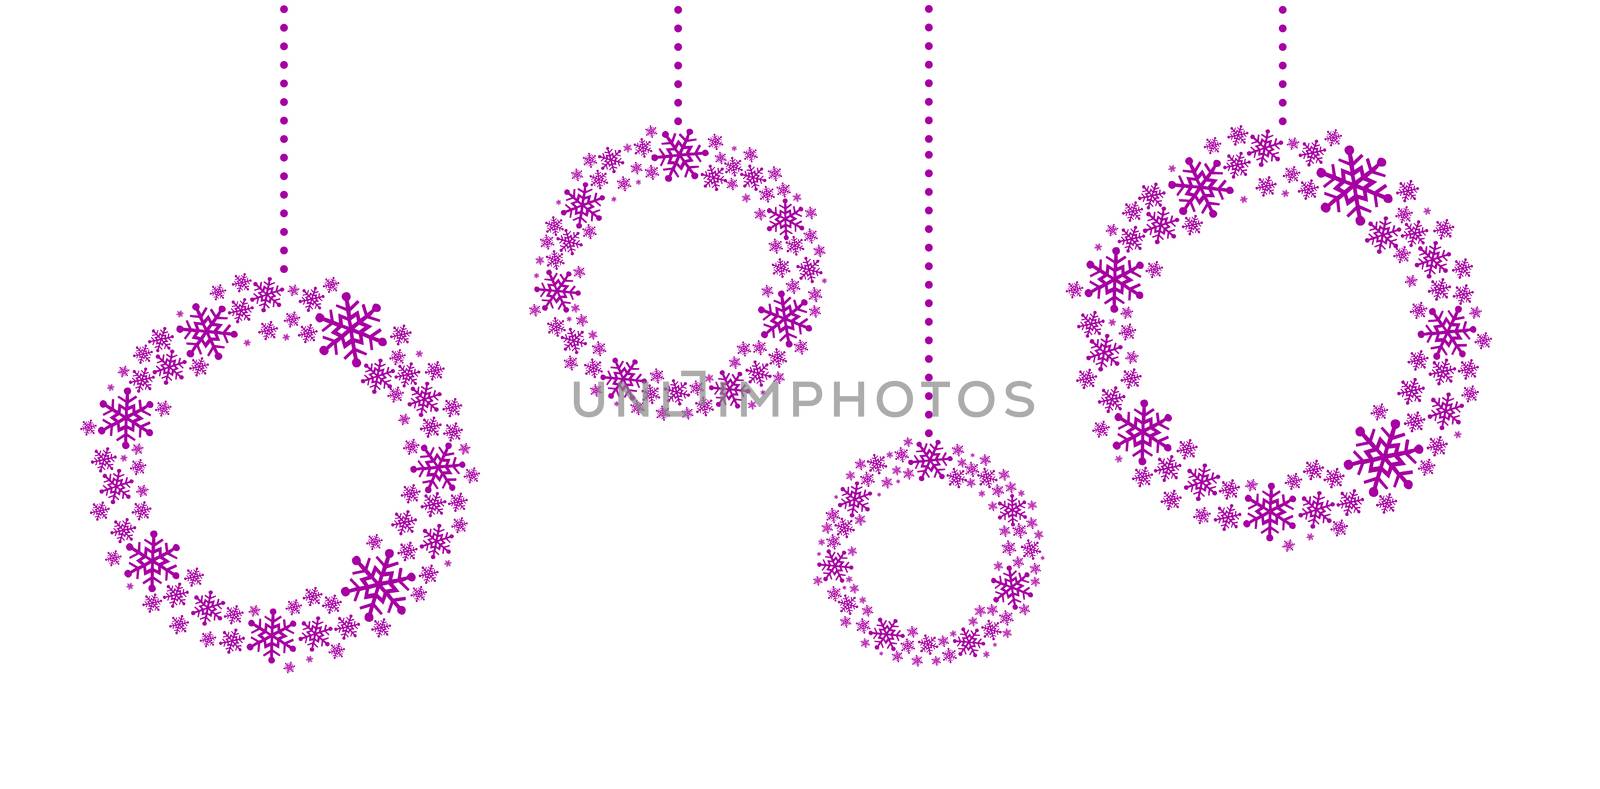 Christmas frames from snowflakes on white background with place for text.